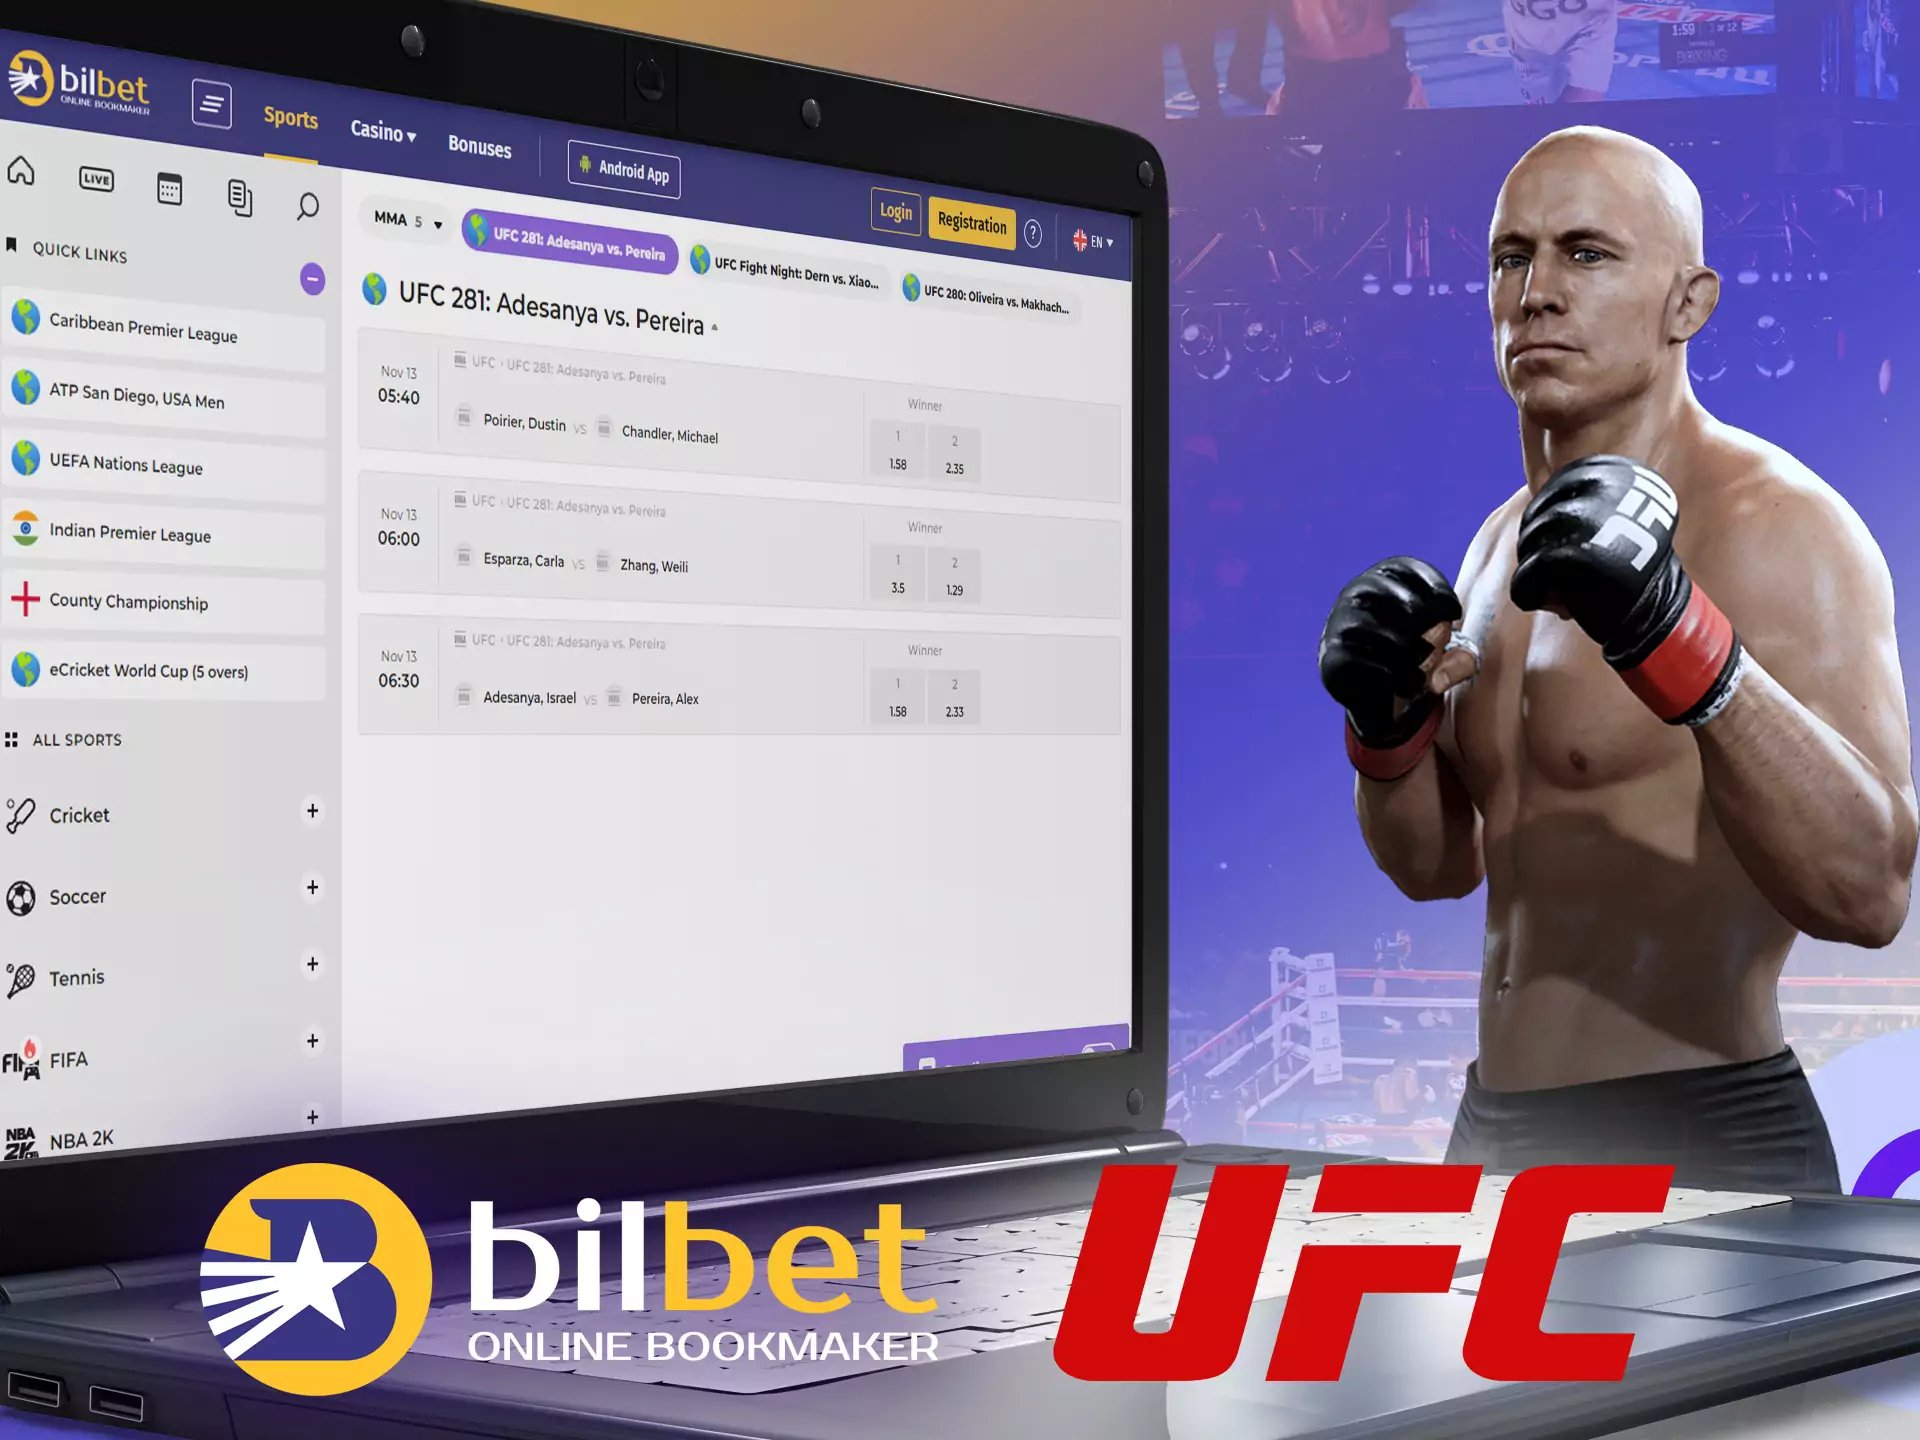 UFC fights are a popular section in the Bilbet sportsbook.